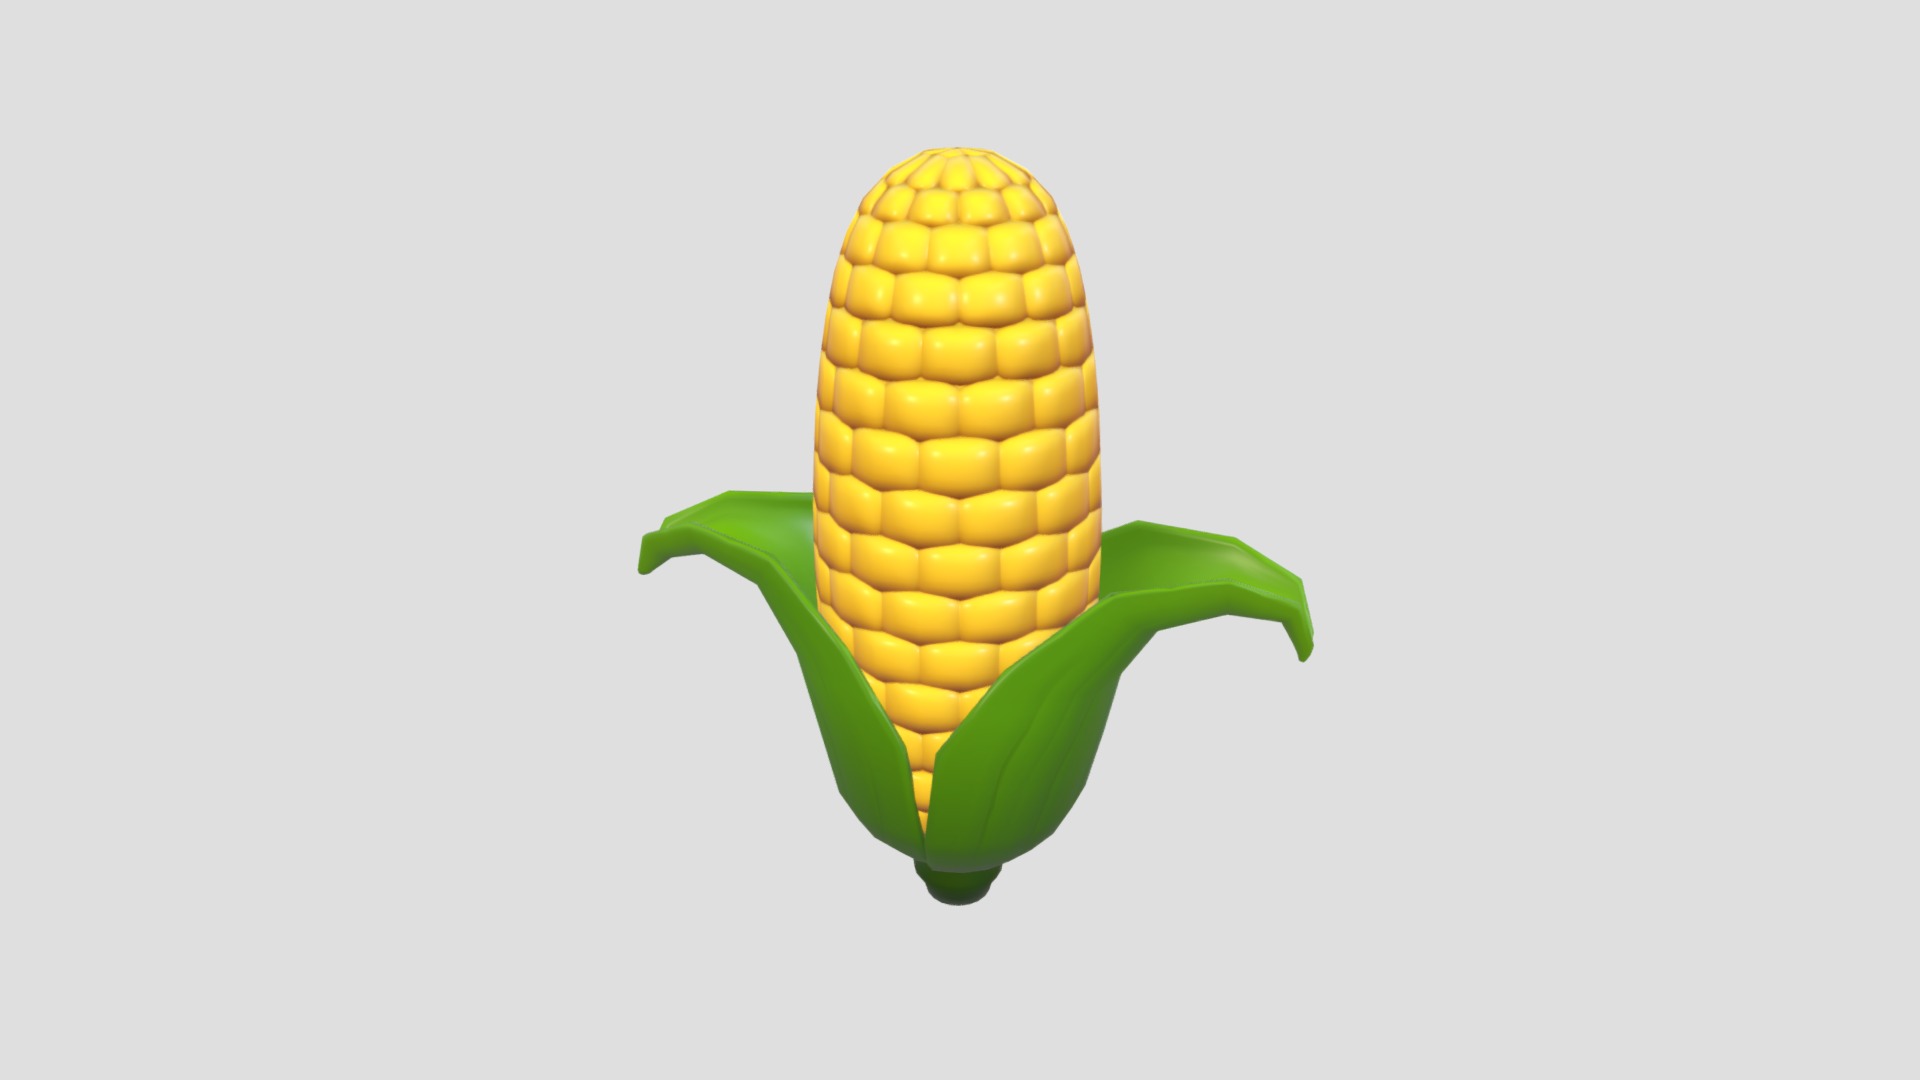 3D model Corn - This is a 3D model of the Corn. The 3D model is about a yellow and green corn.